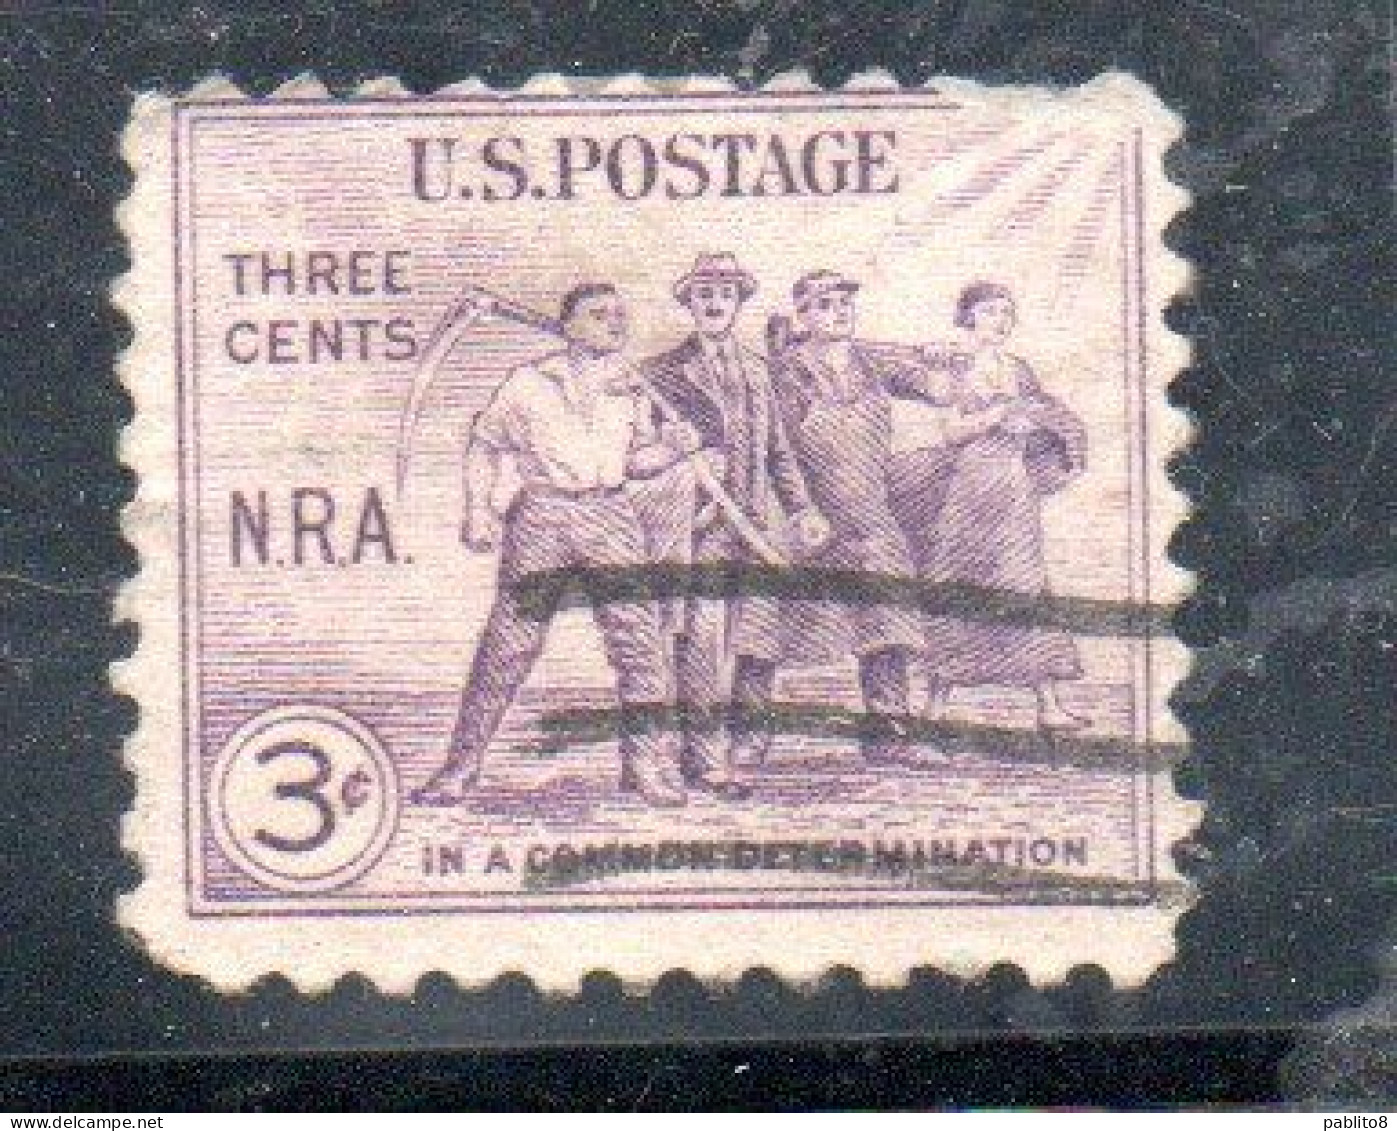 USA STATI UNITI 1933 NATIONAL RECOVERY ACT ISSUE NRA GROUP OF WORKERS CENT 3c STRIP USED USATO OBLITERE' - Usati